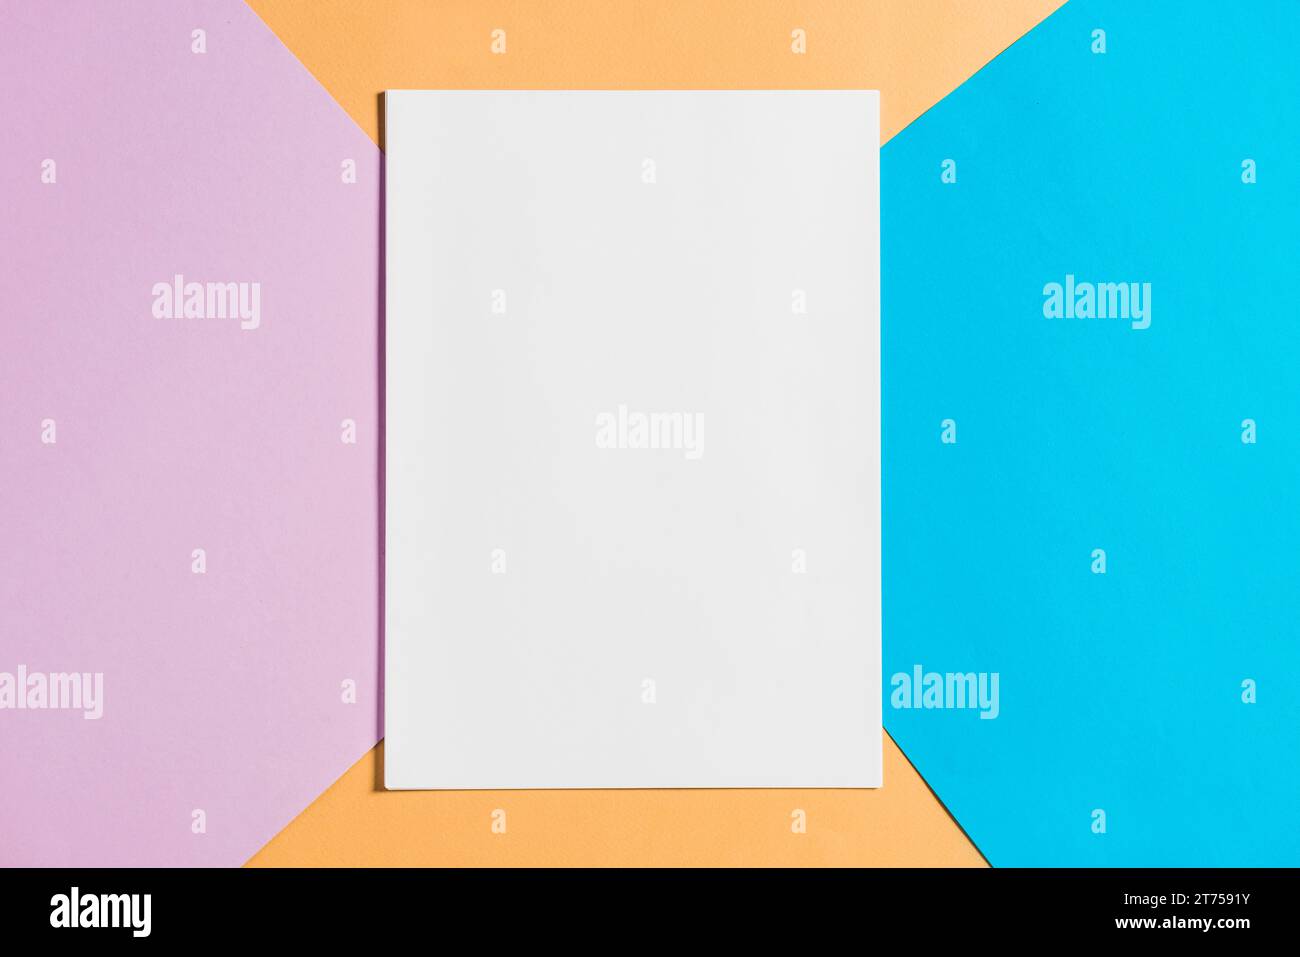 Blank paper sheet colorful papers backdrop Stock Photo